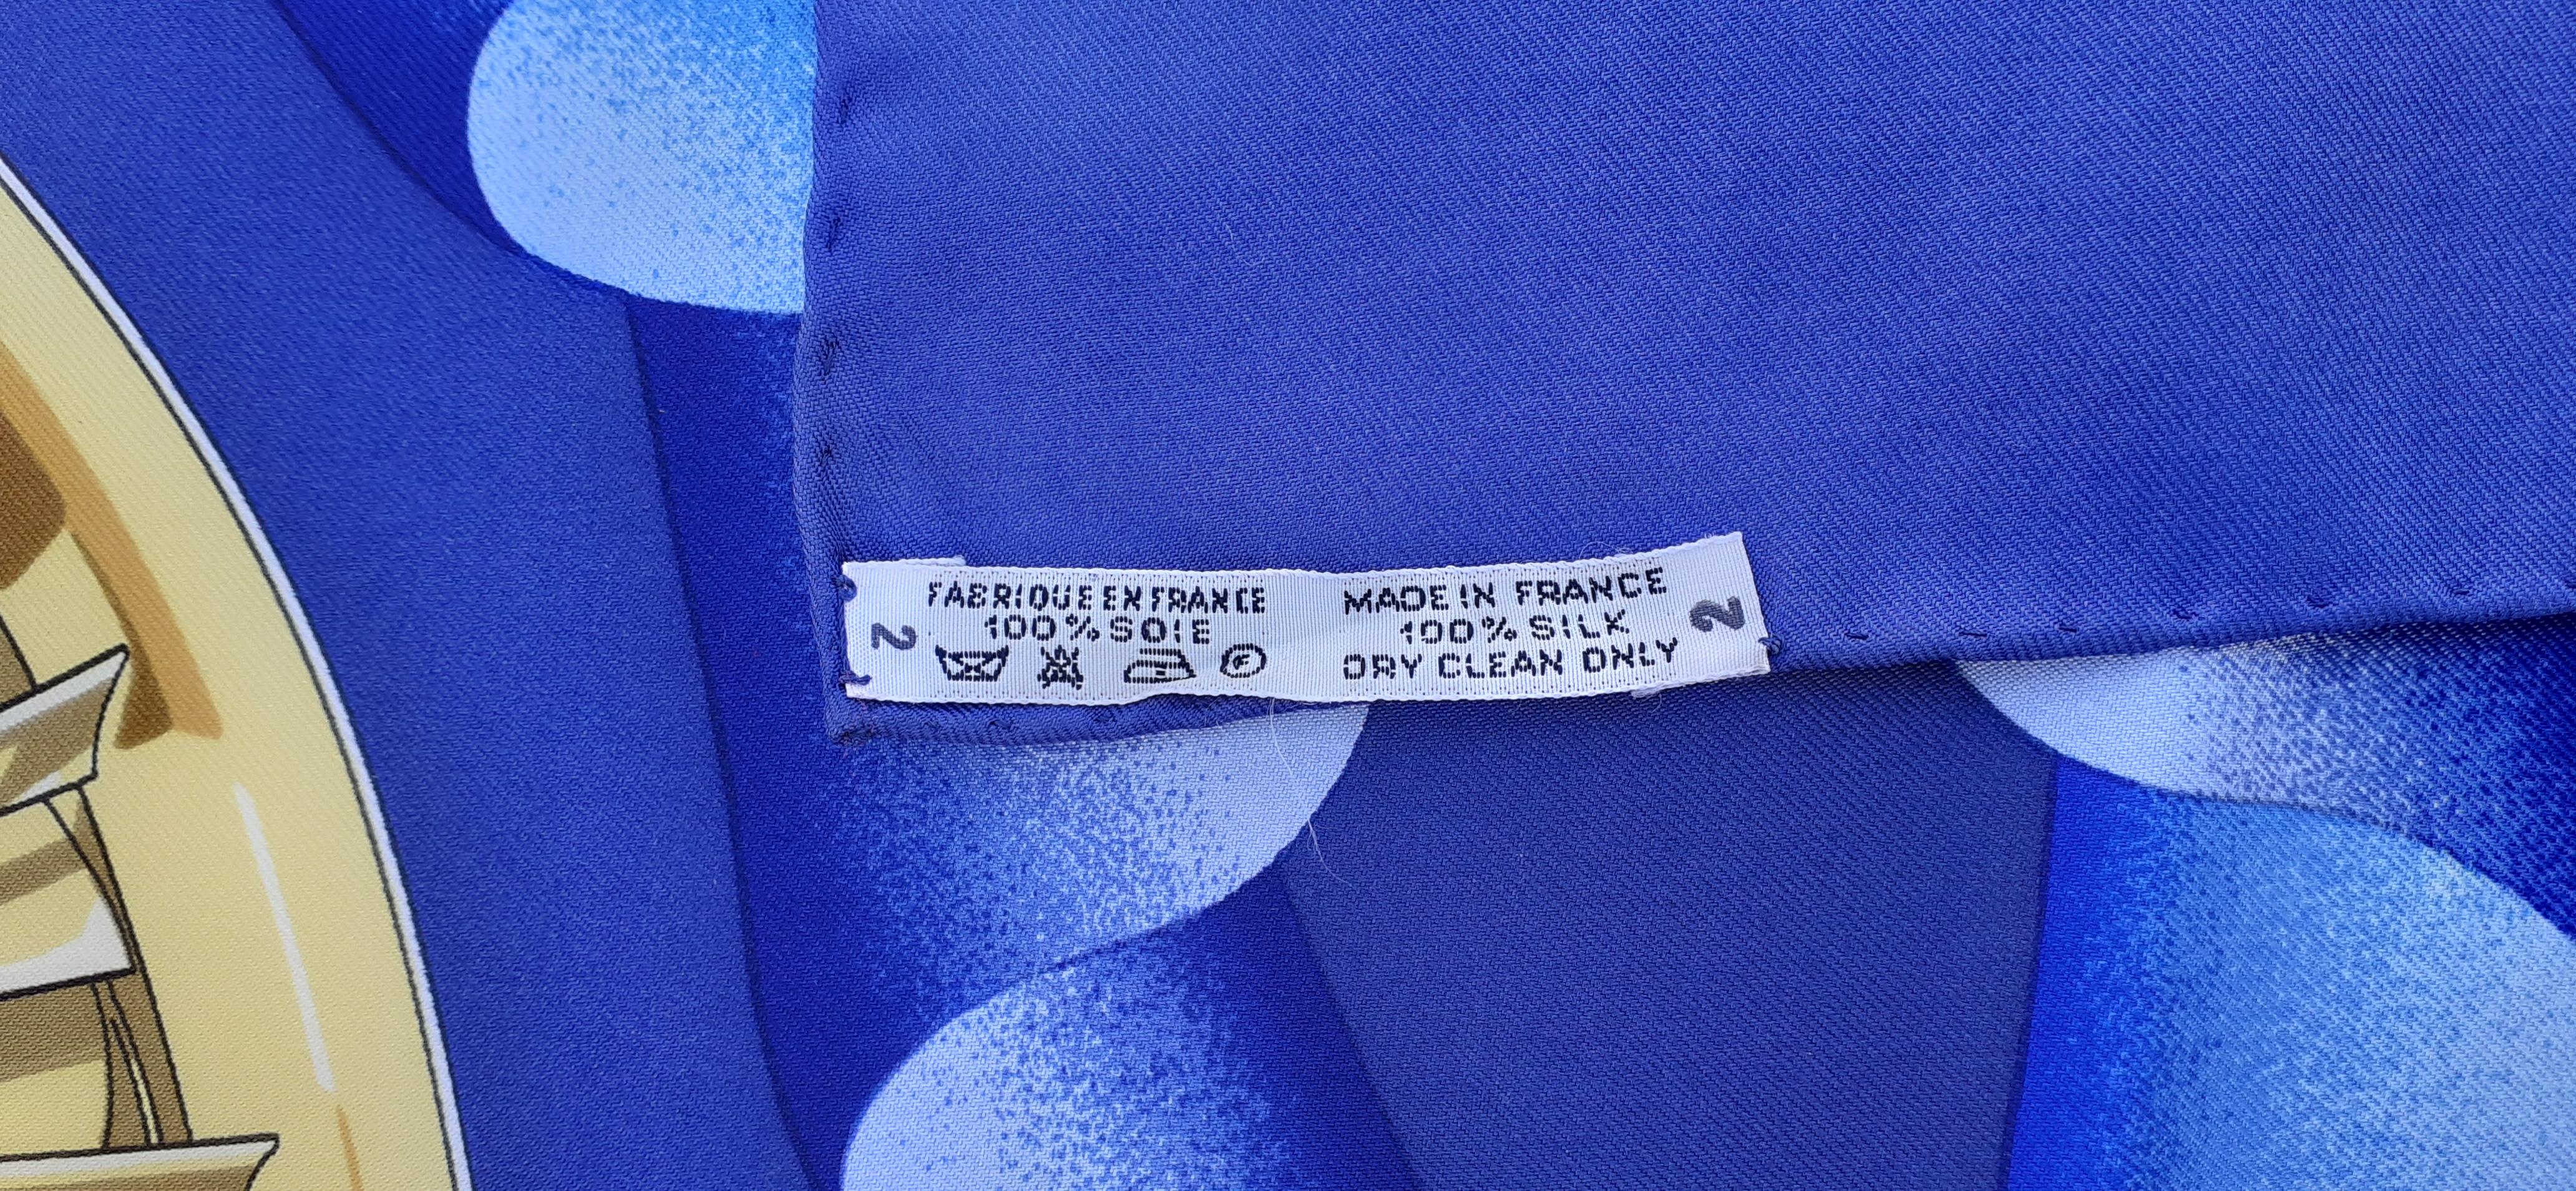 Hermès Silk Scarf Sold Exclusively Aboard Air France Planes Ledoux 1962 Rare For Sale 7